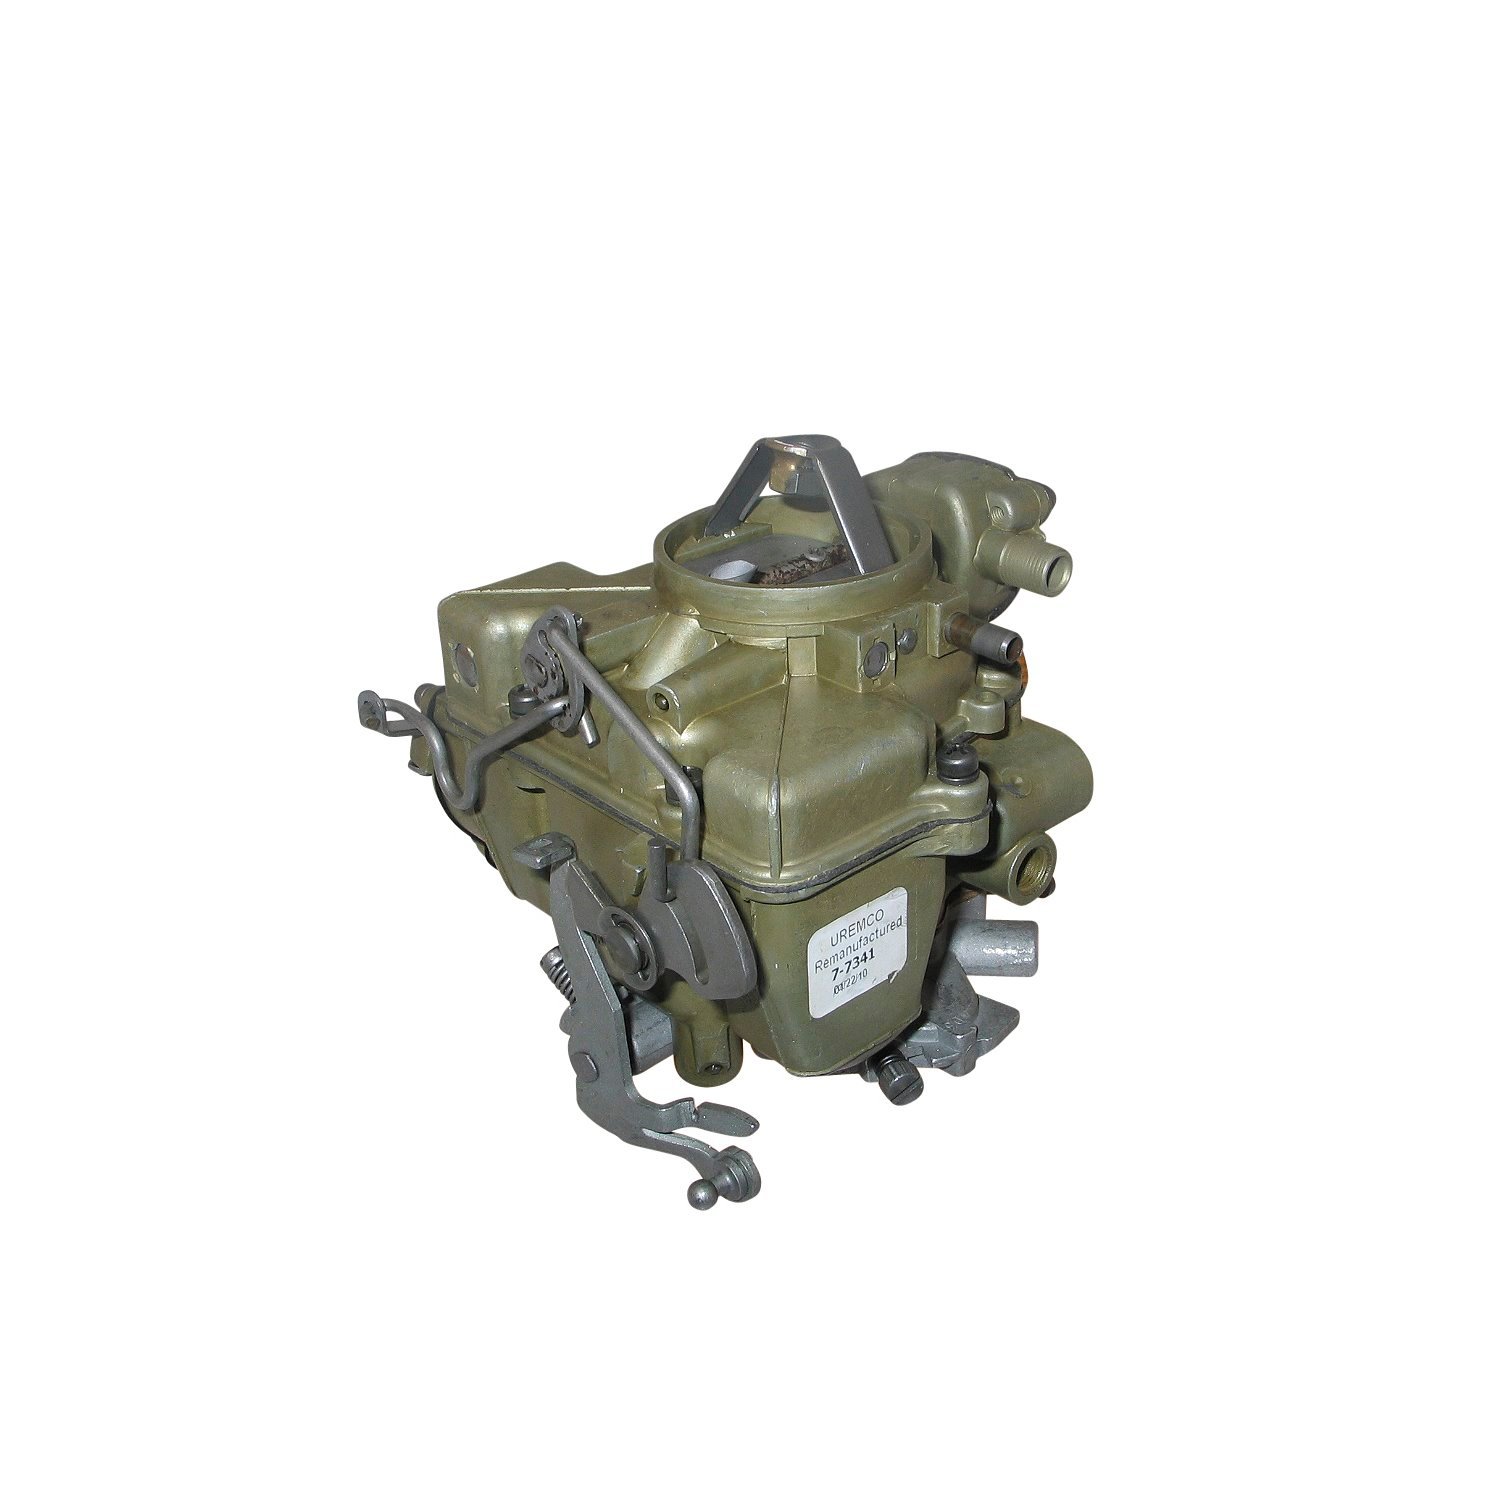 7-7341 Holley Remanufactured Carburetor, 1940-Style